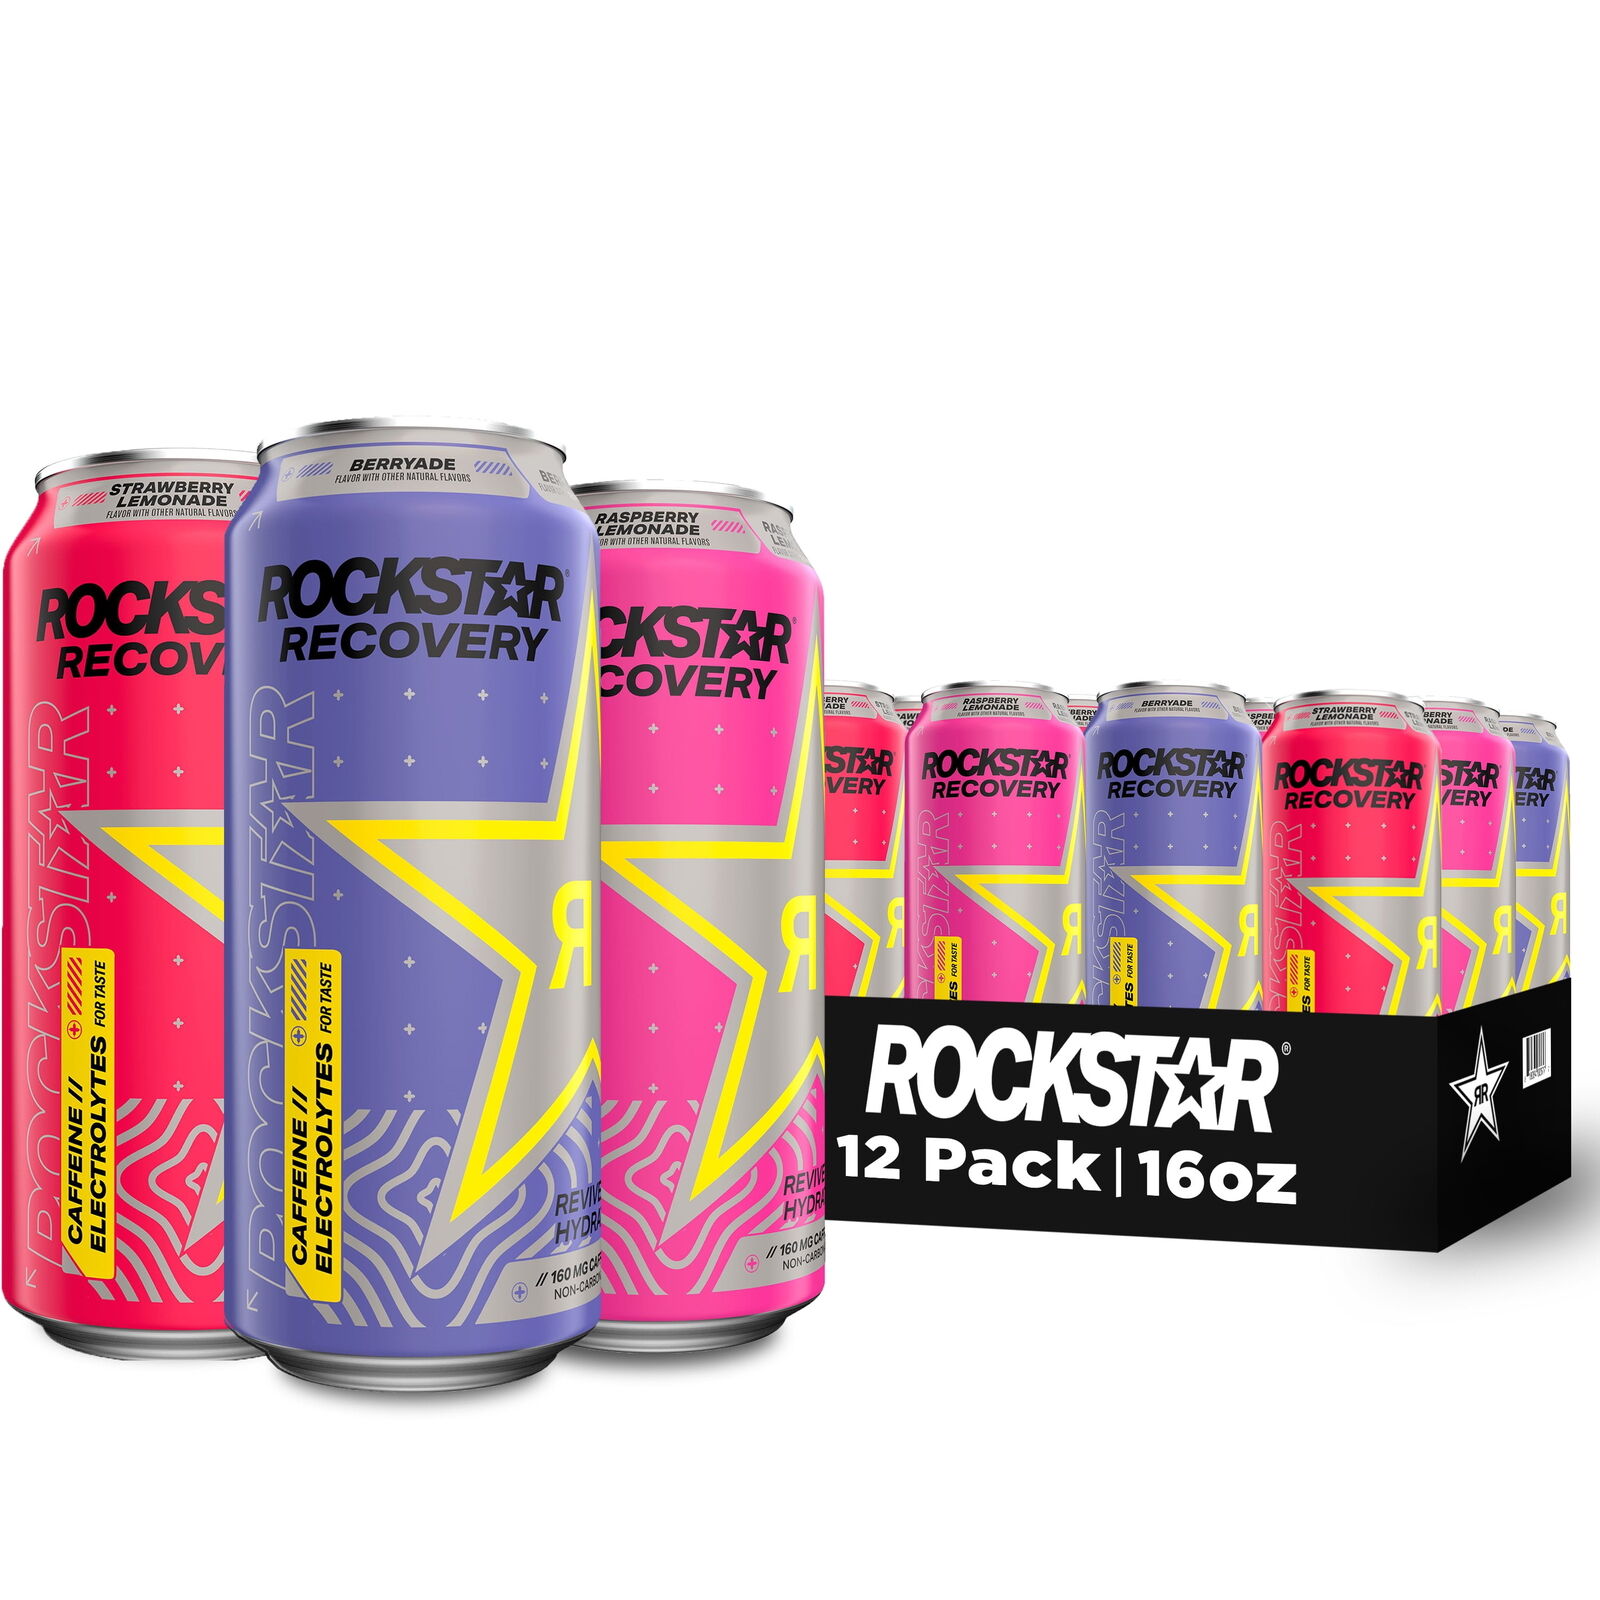 Rockstar Recovery 3 Flavor Variety Pack Energy Drink, 16 oz, 12 Pack Cans,NEW